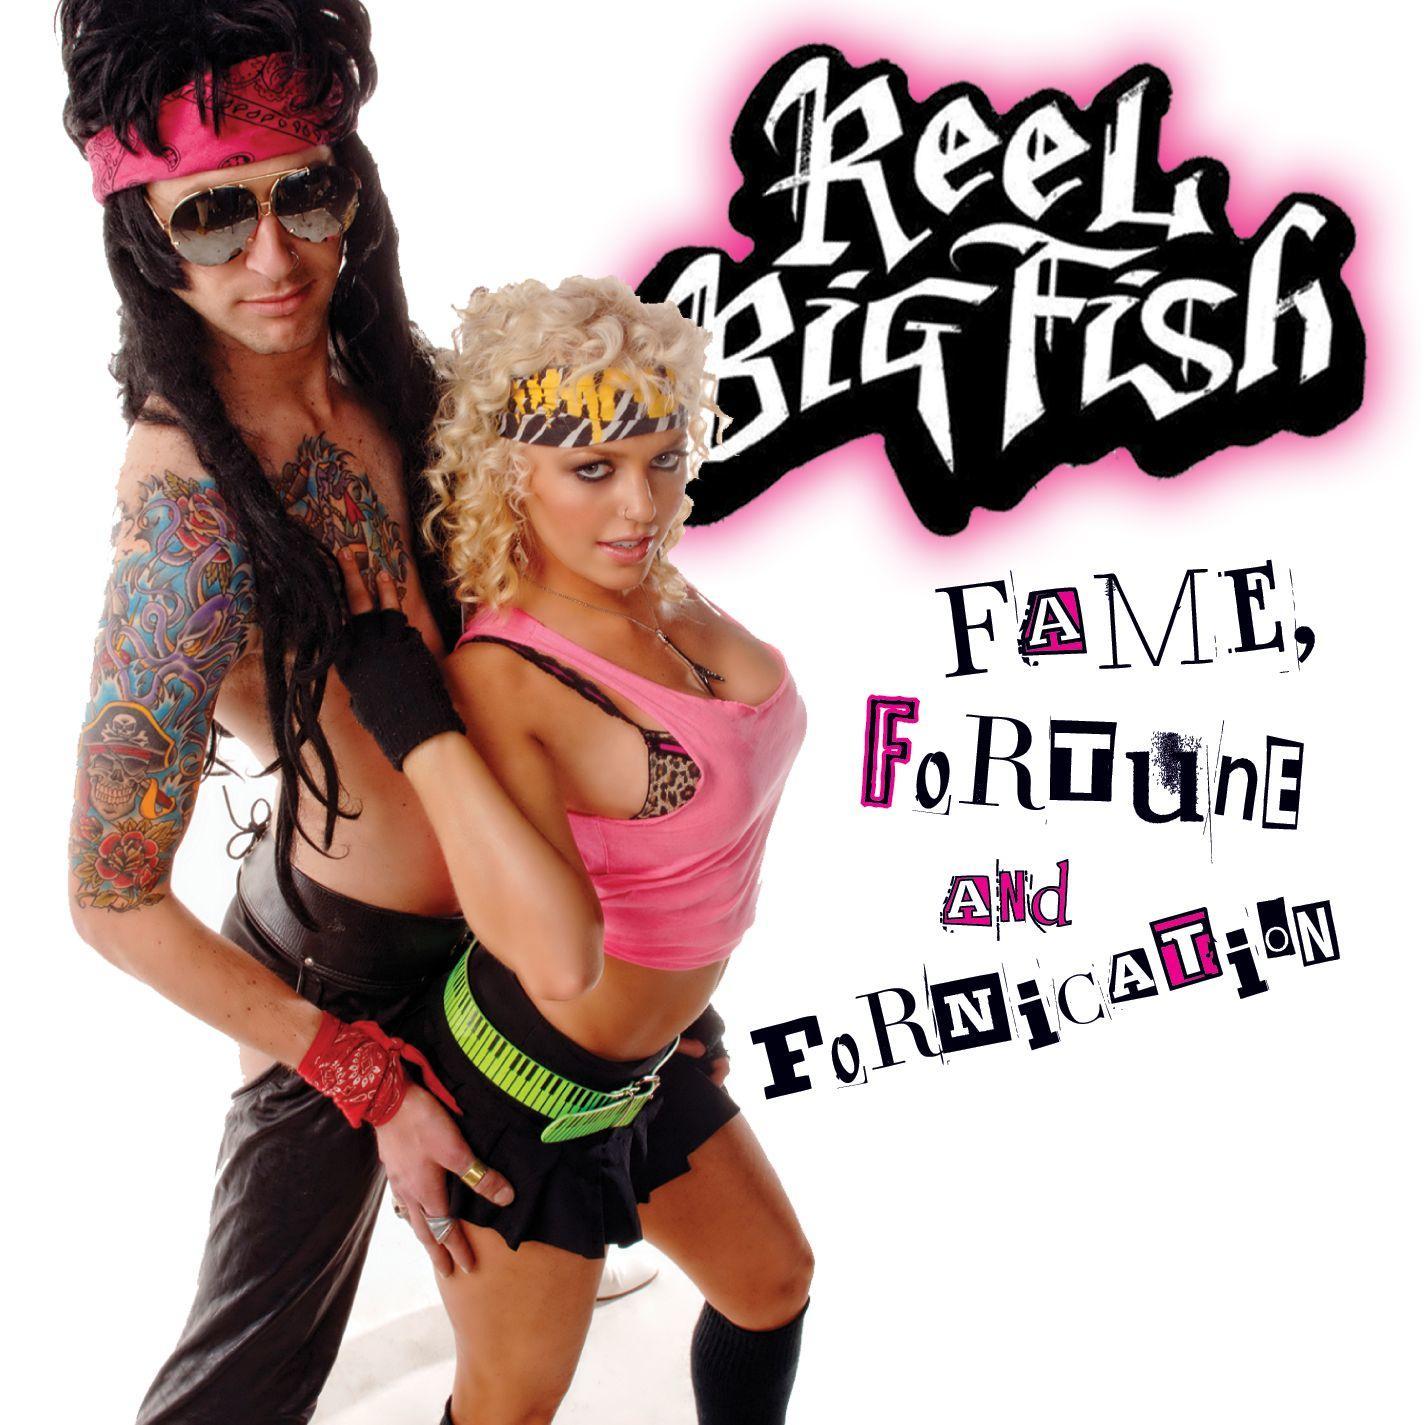 Reel Big Fish - Fame, Fortune and Fornication (2009) FLAC Download